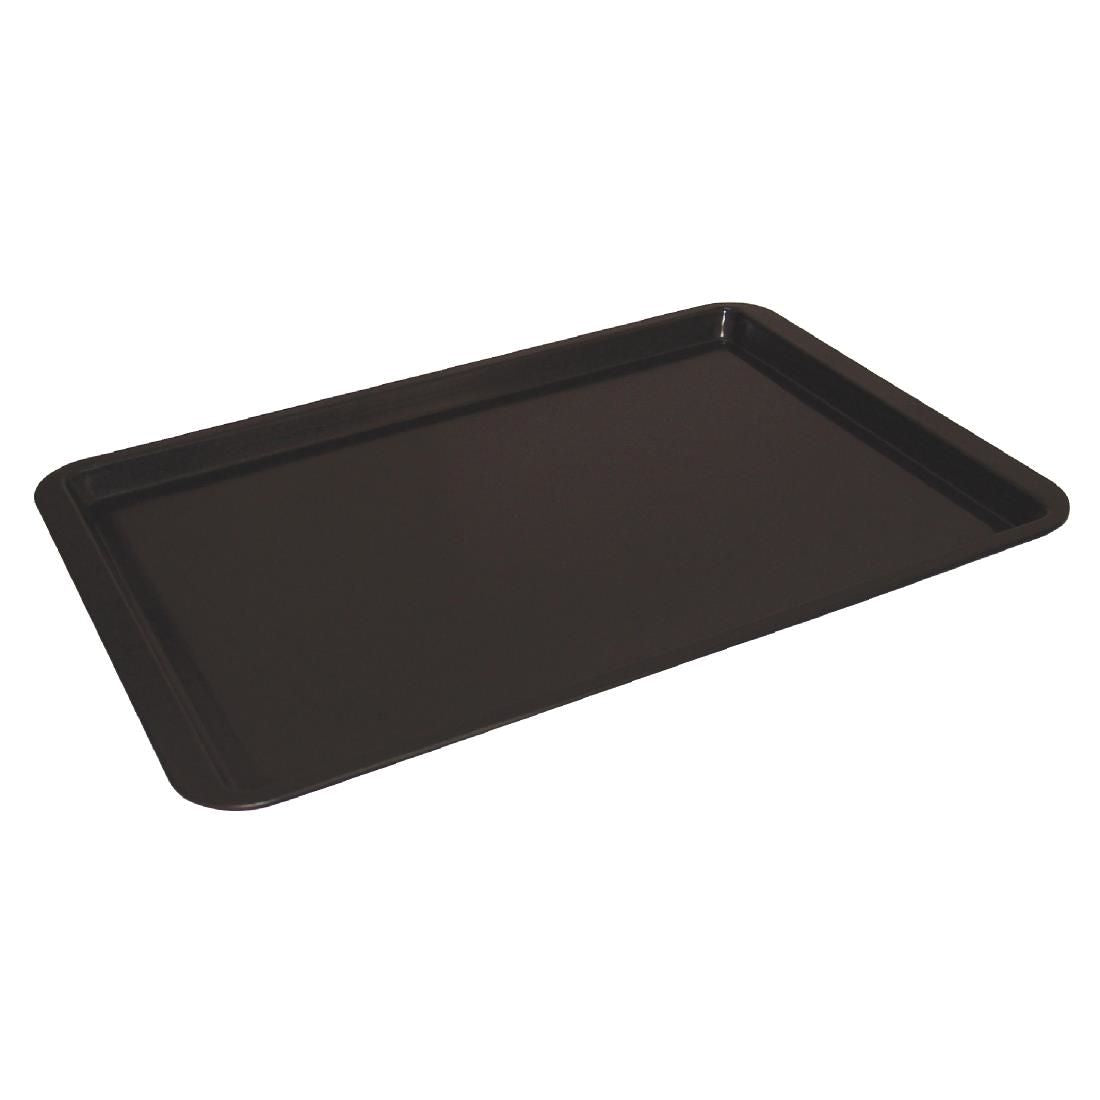 GD015 Vogue Non-Stick Carbon Steel Baking Tray 430 x 280mm JD Catering Equipment Solutions Ltd